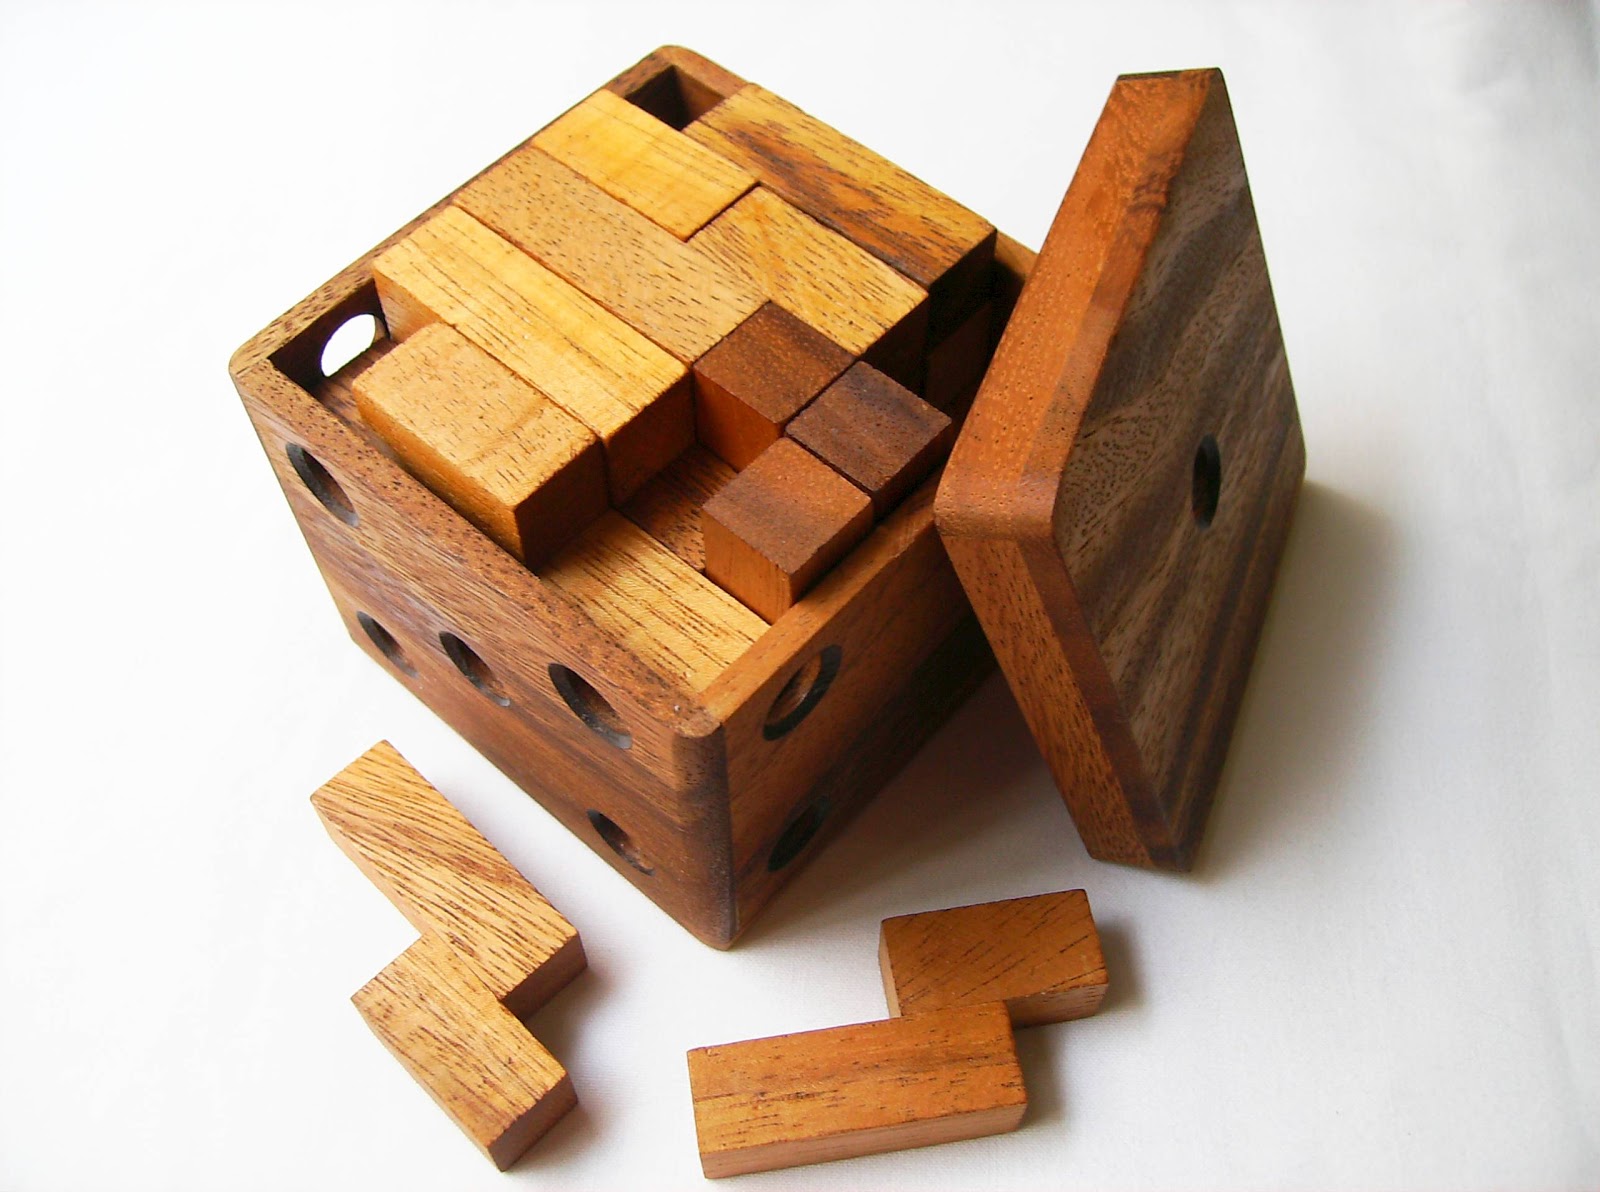 PuzzleMad: When is a cube not a cube?